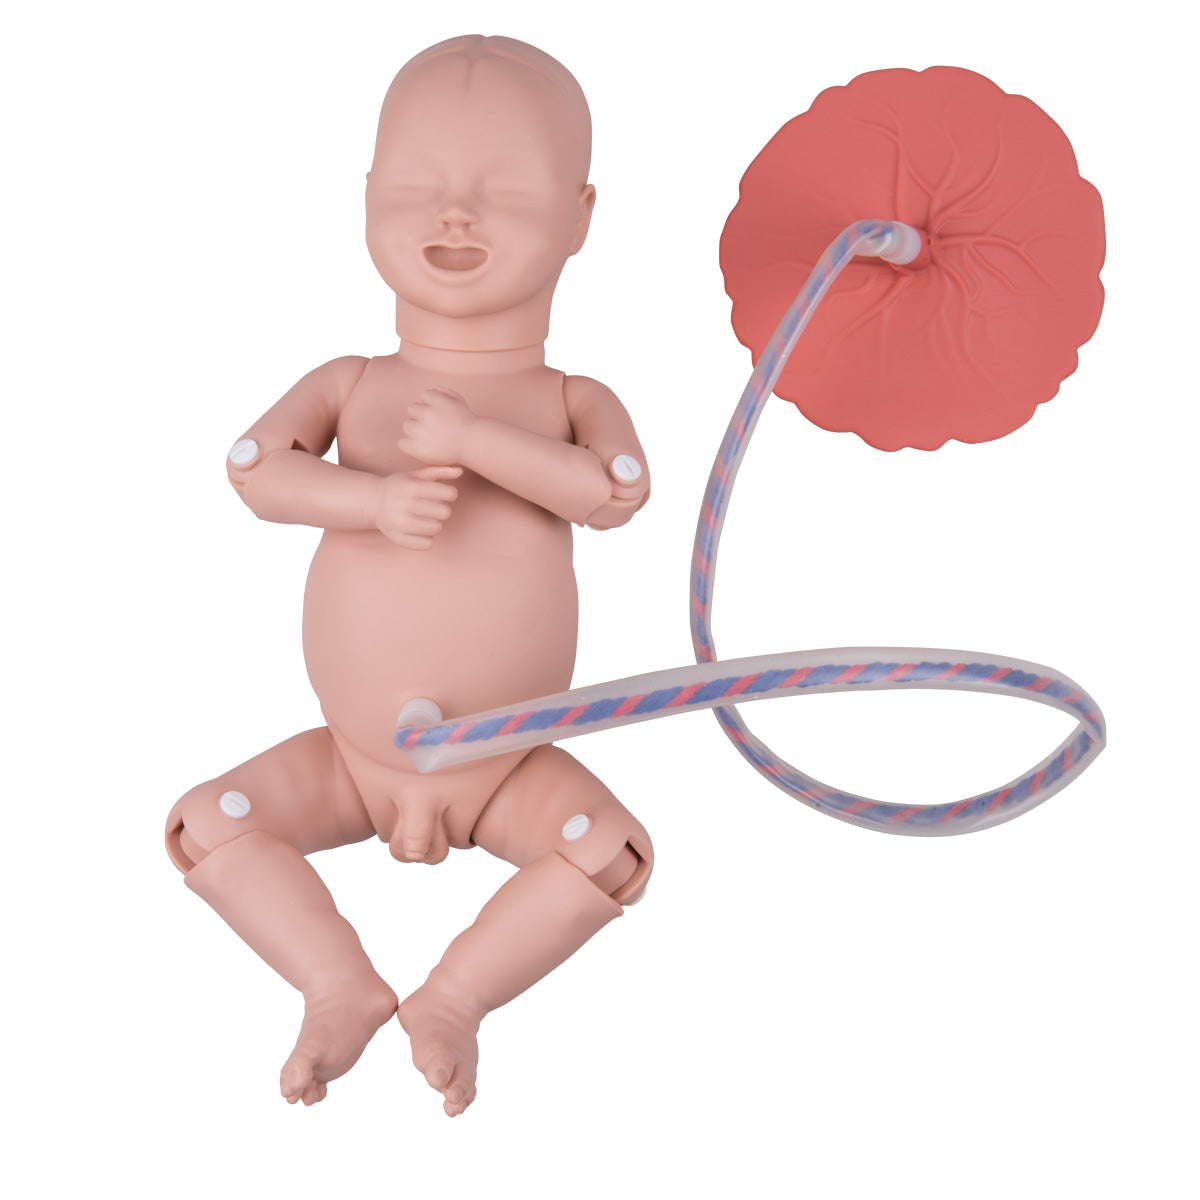 Practical birth simulator BASIS targeted training in uncomplicated and complicated births etc